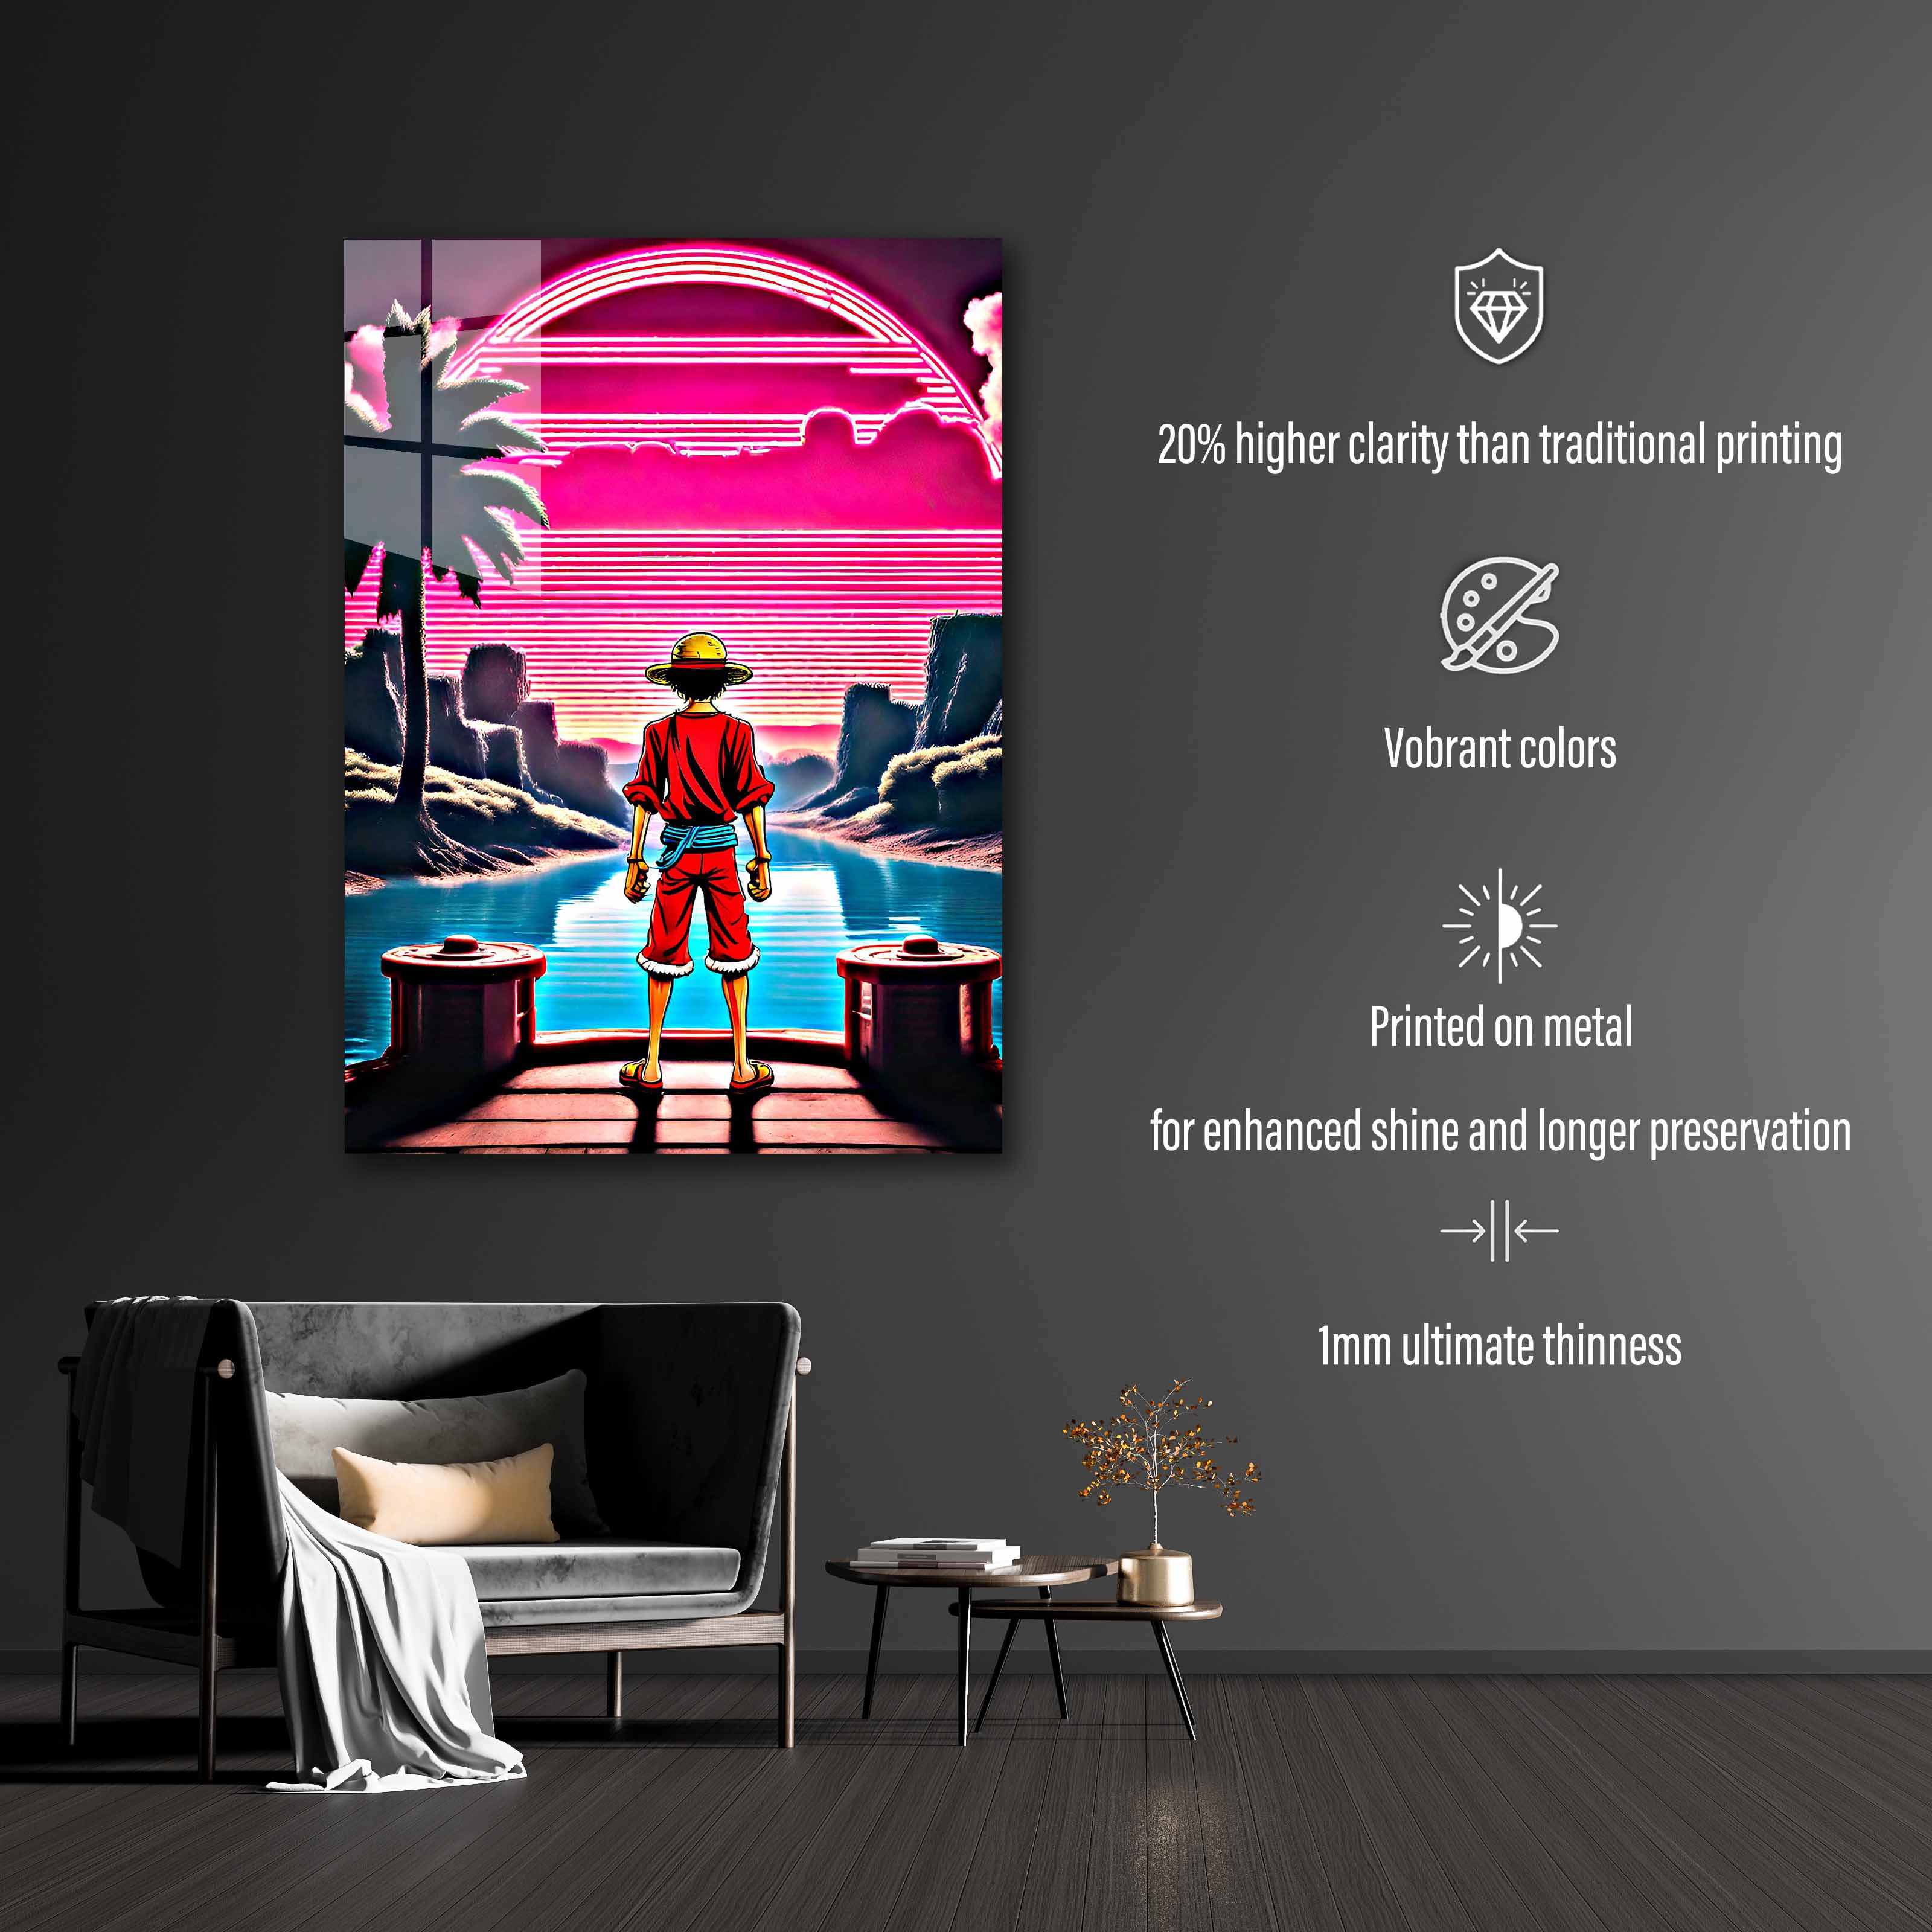 Monkey D Luffy Future-designed by @DynCreative